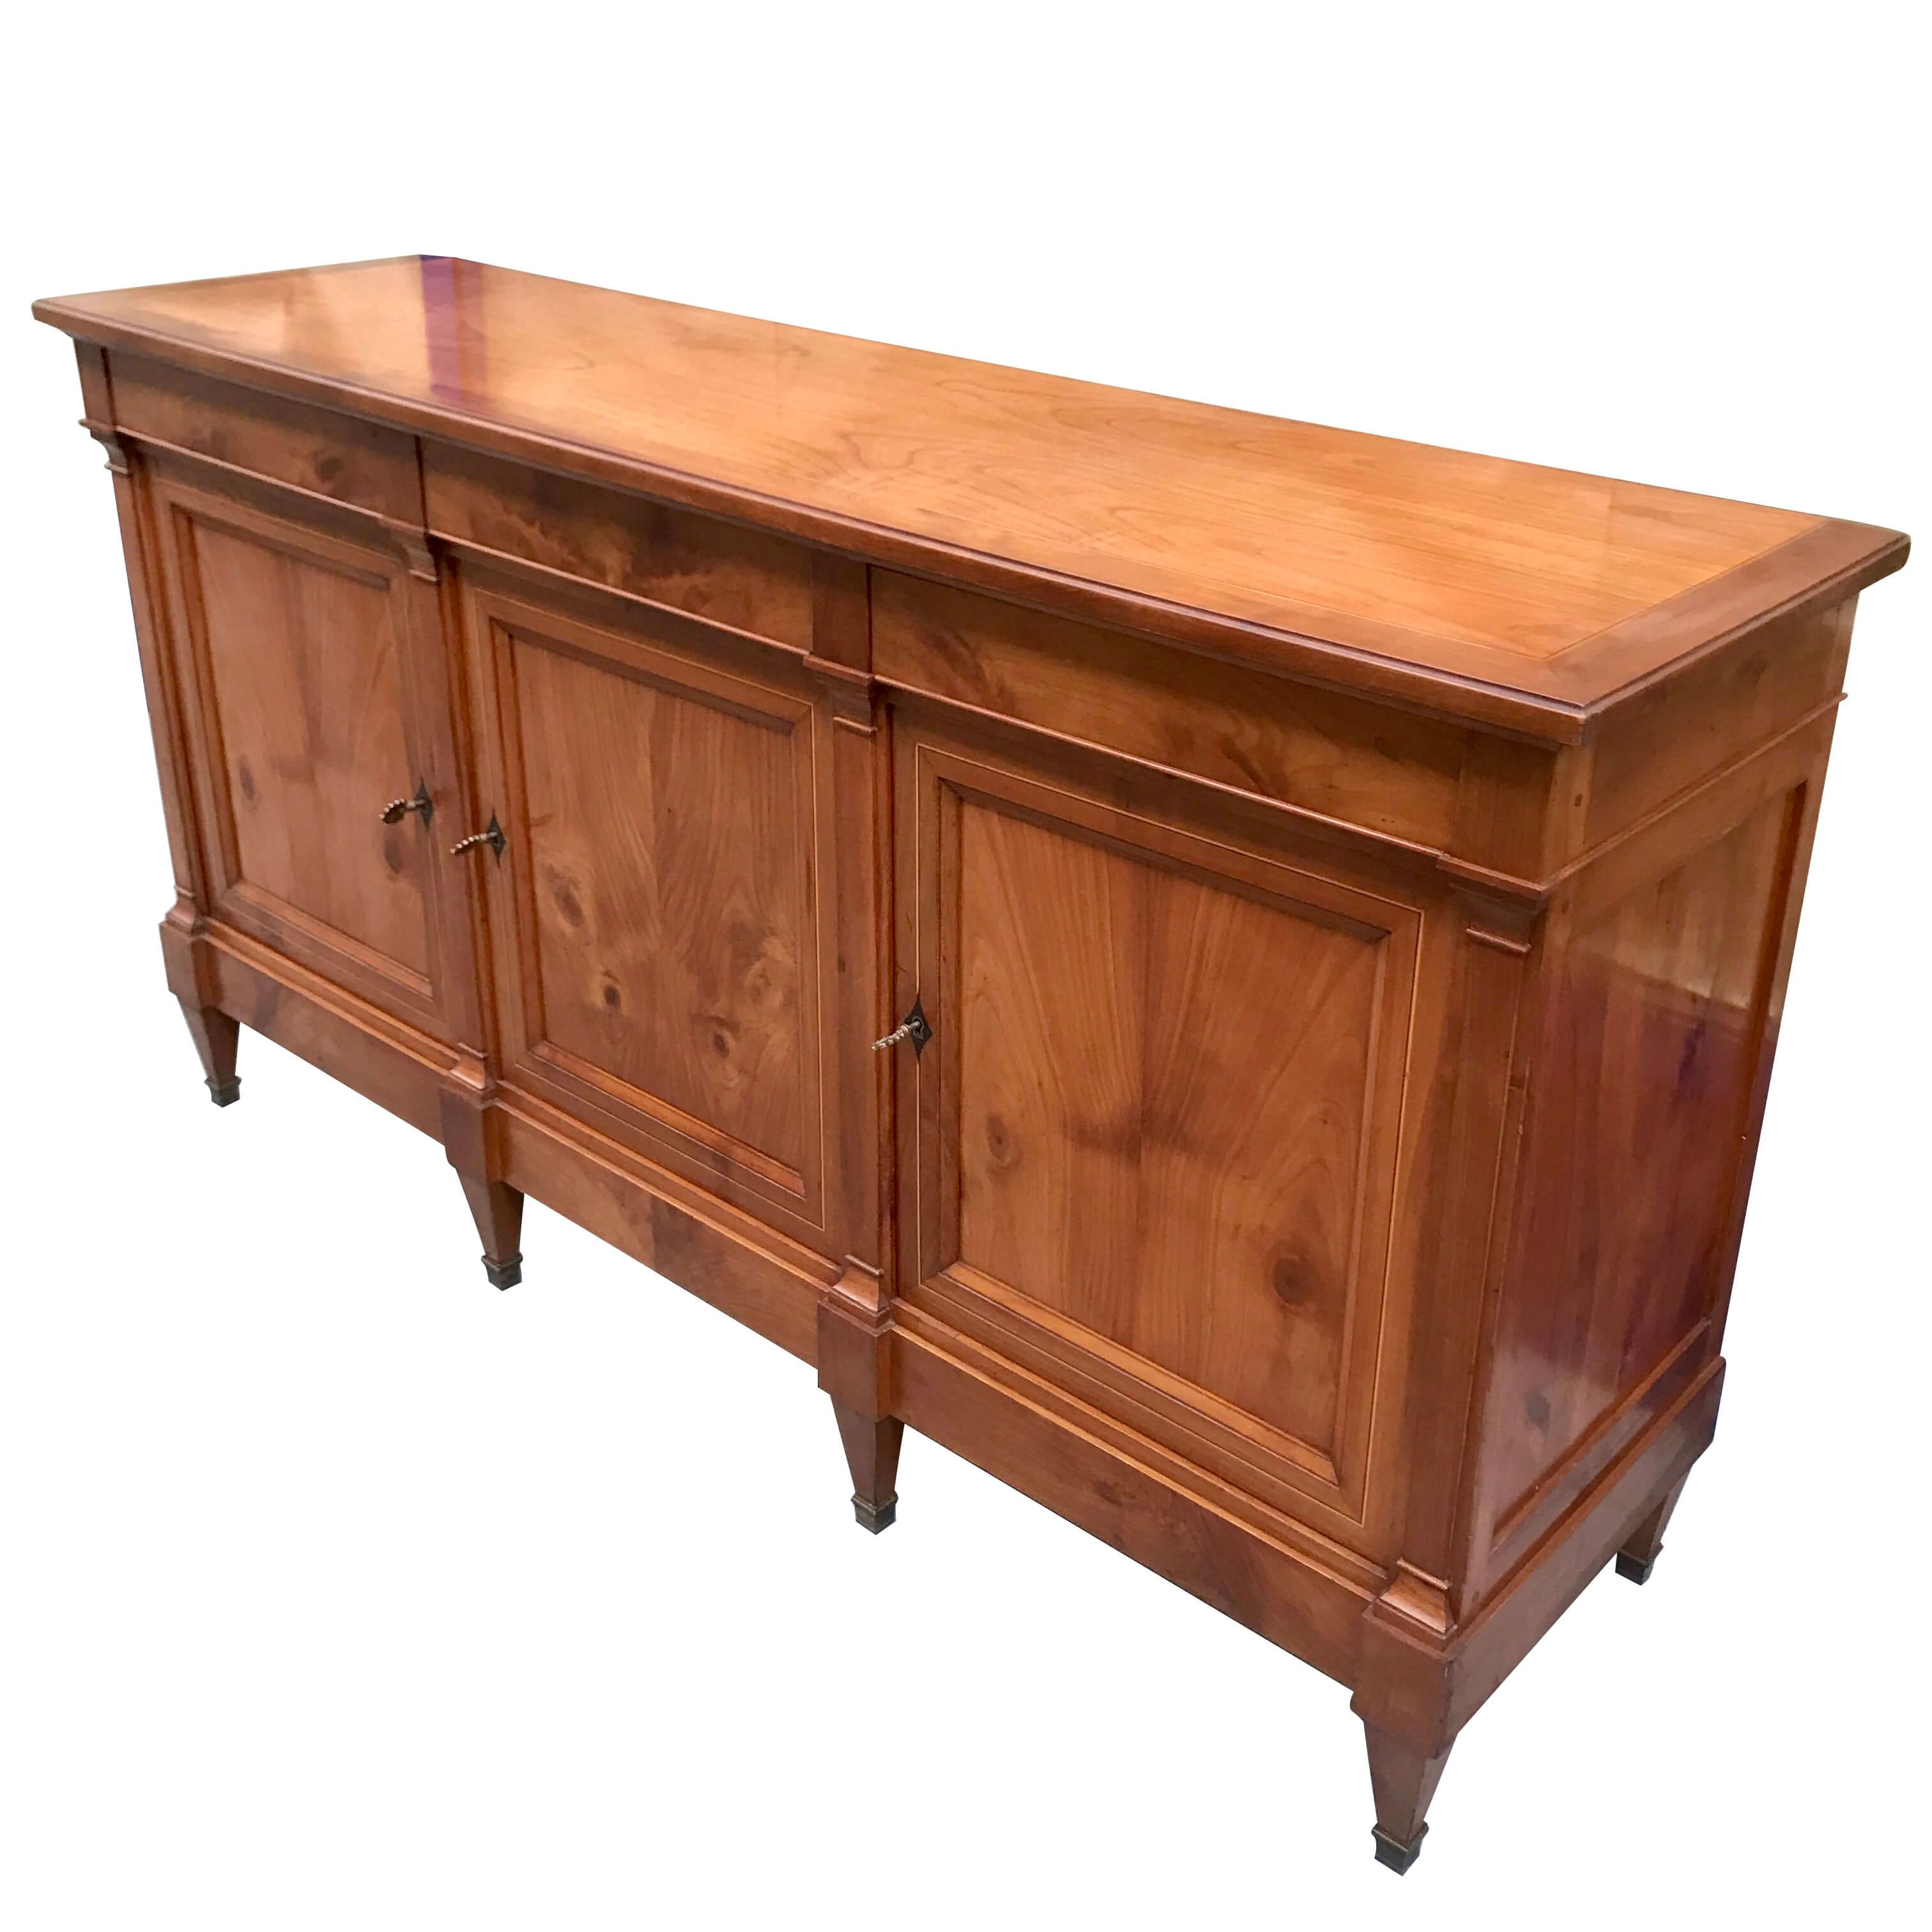 Directoire Style Sideboard With 3 Doors And 3 Drawers In Cherry Wood With  Inlaid Fillets And Bronze Brackets, 19th Century | Intondo For Recent Sideboard Storage Cabinet With 3 Drawers & 3 Doors (Photo 13 of 15)